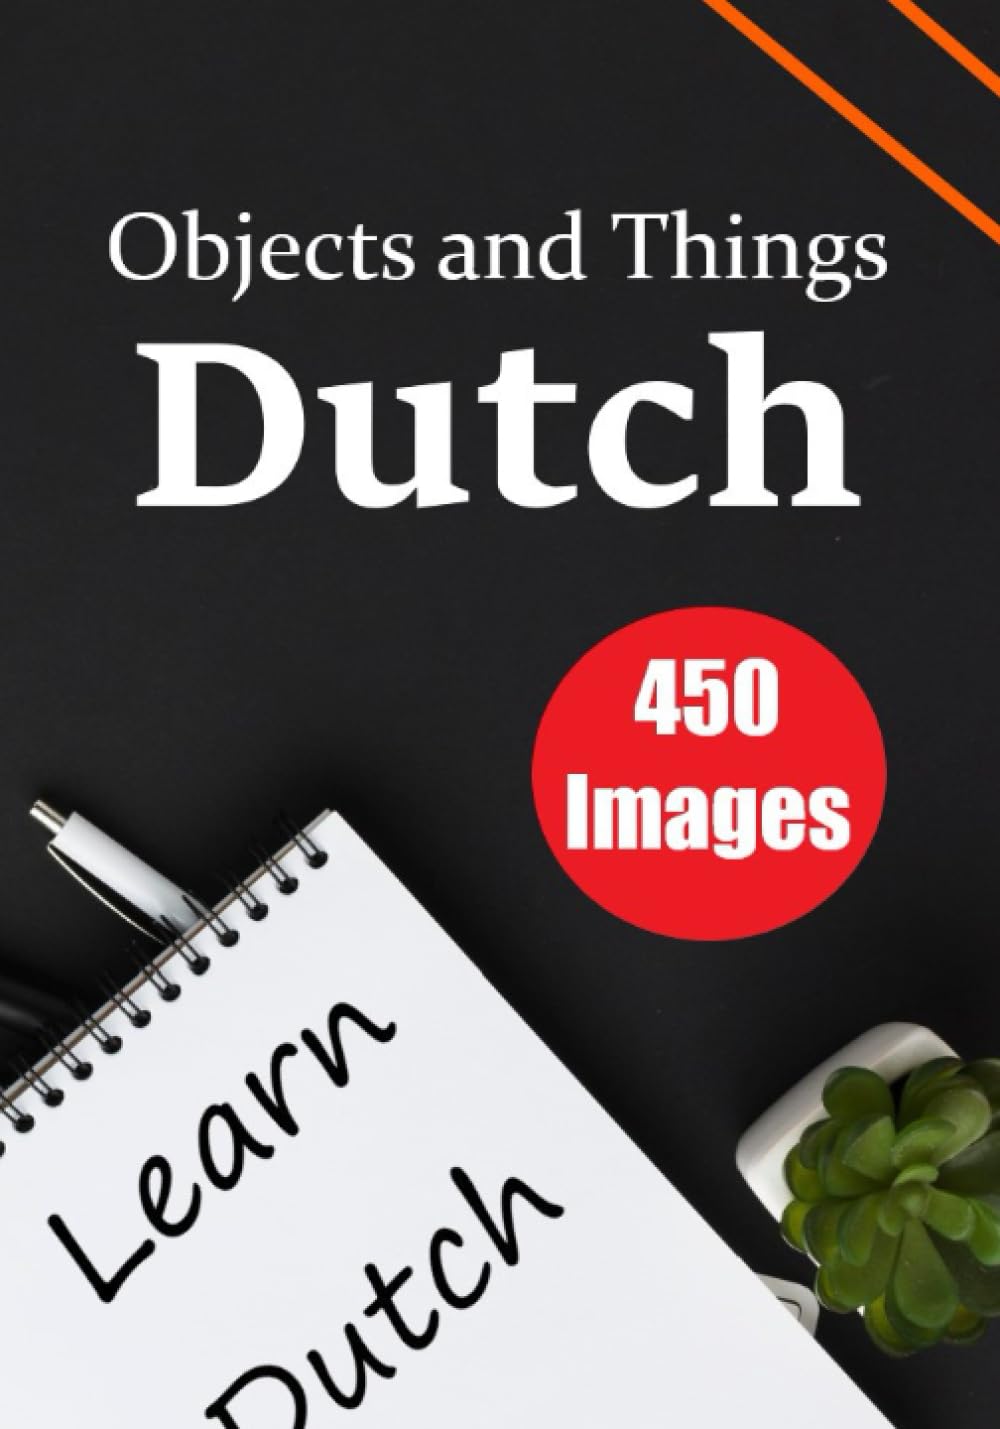 The Dutch Encyclopedia: A Visual Guide to 450 Objects and Things - Skriuwer.com